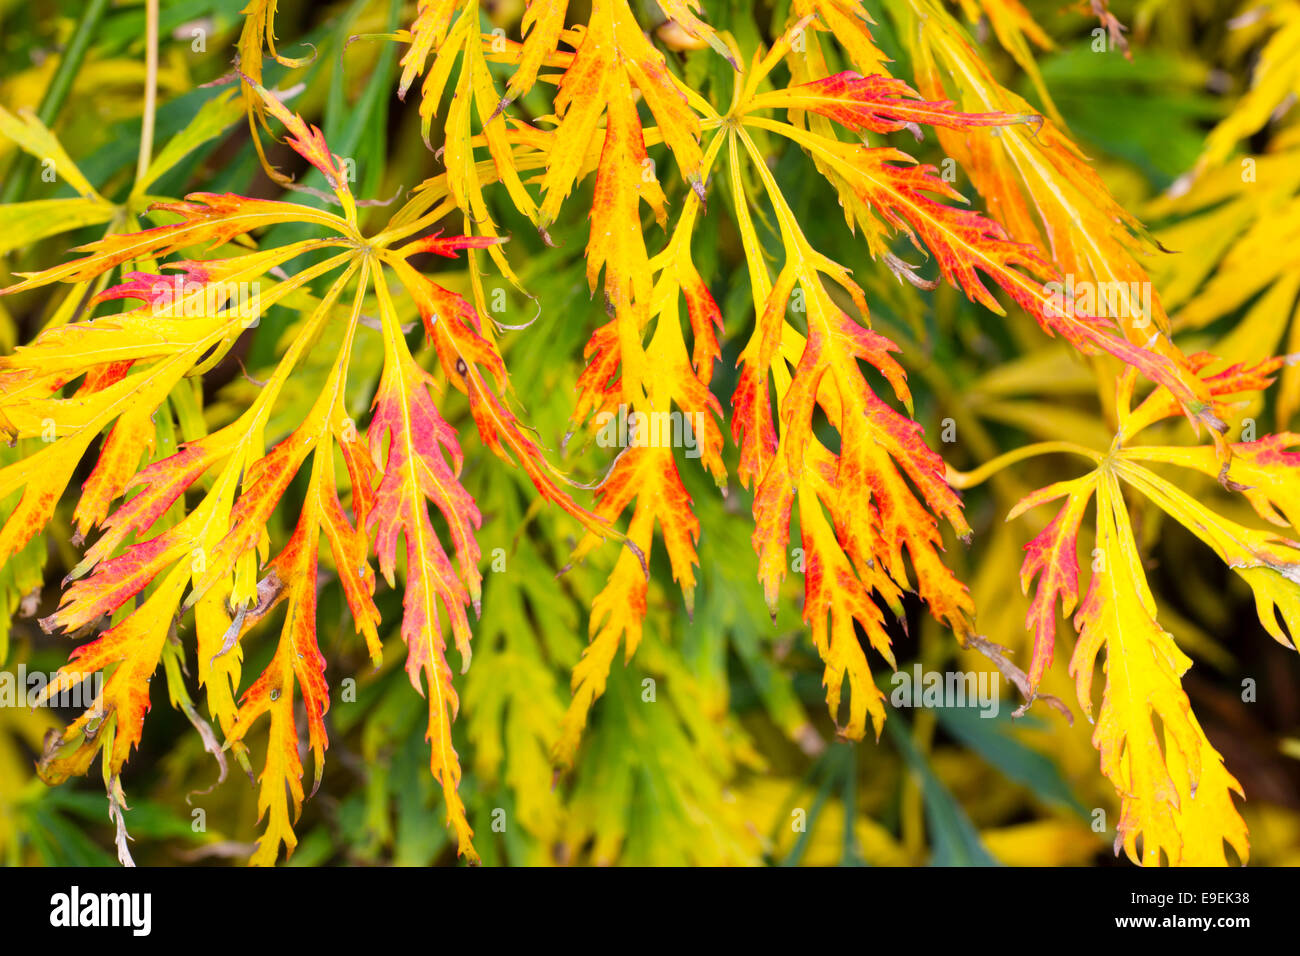 Red and gold autumn colour / fall color of Acer palmatum dissectum Stock Photo